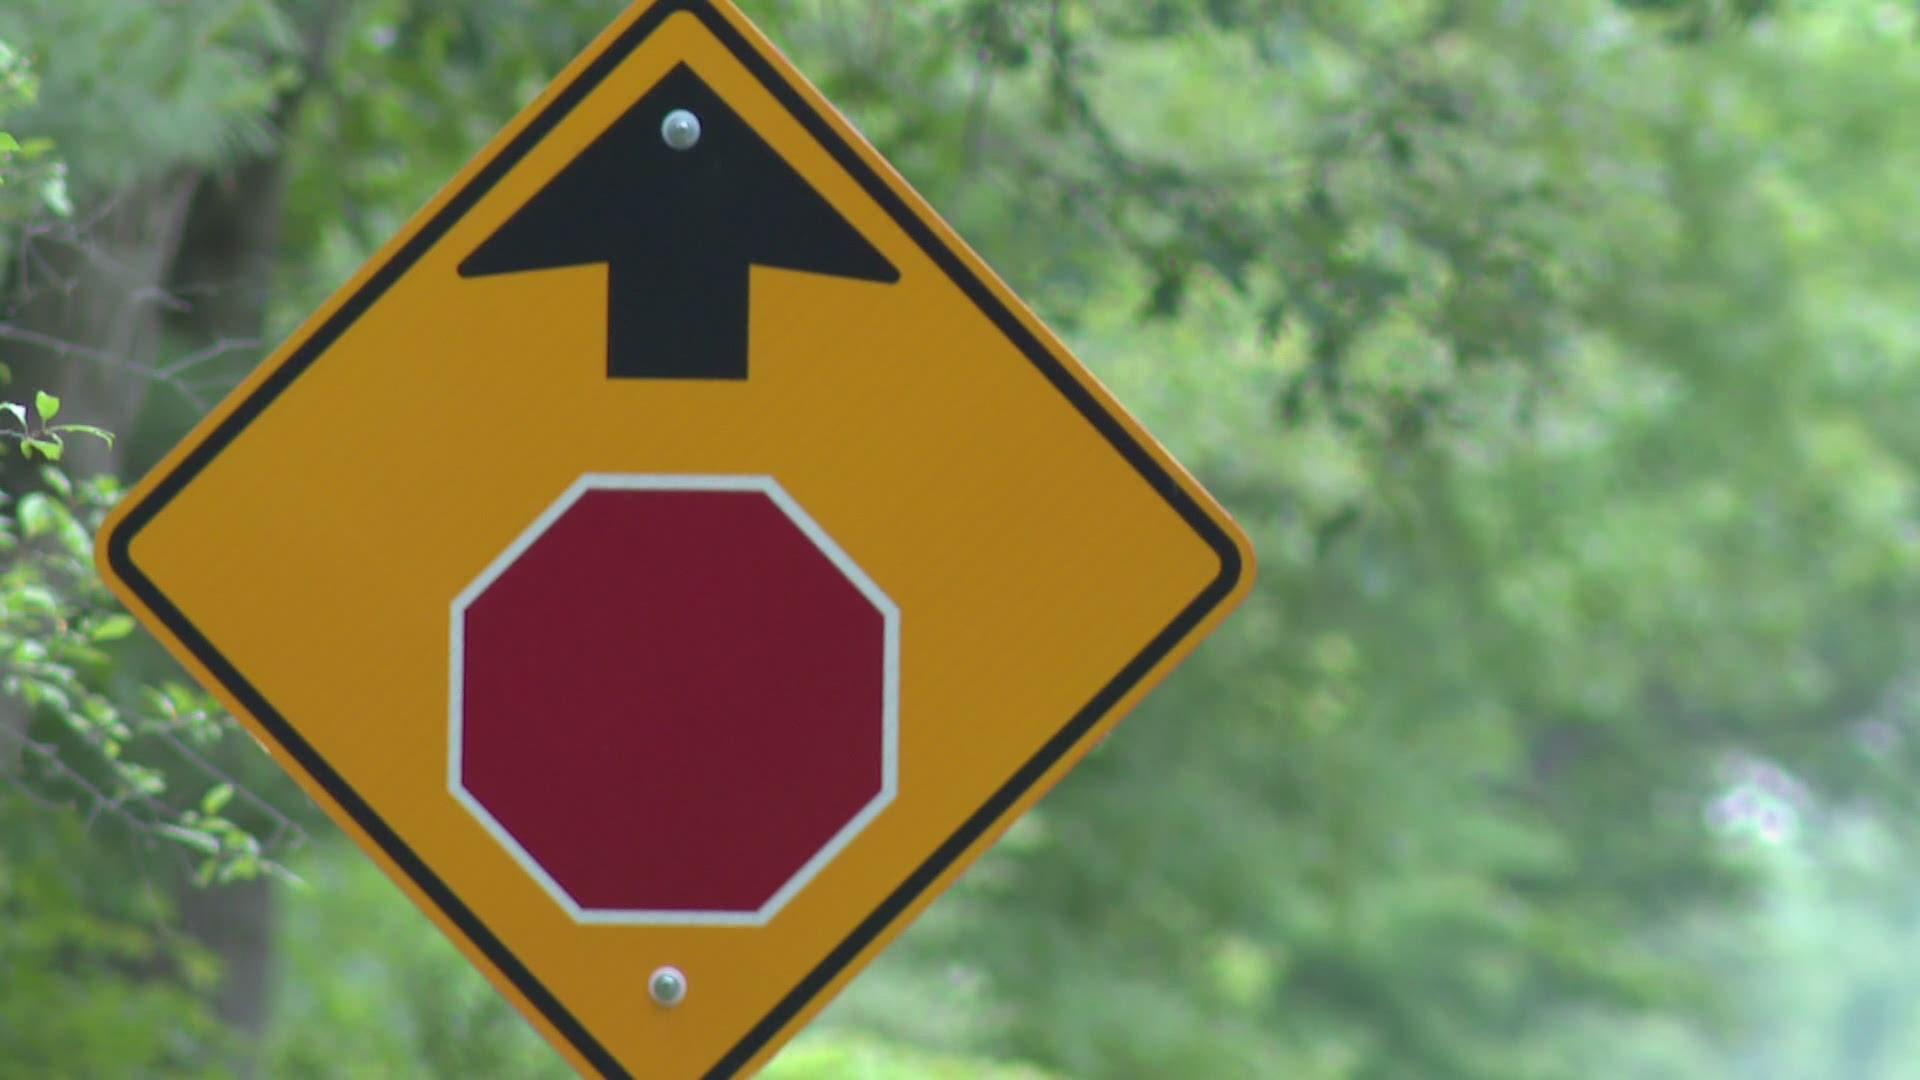 Between 300 and 400 new street signs are now up along county roads and at high-speed intersections in Muskegon County.